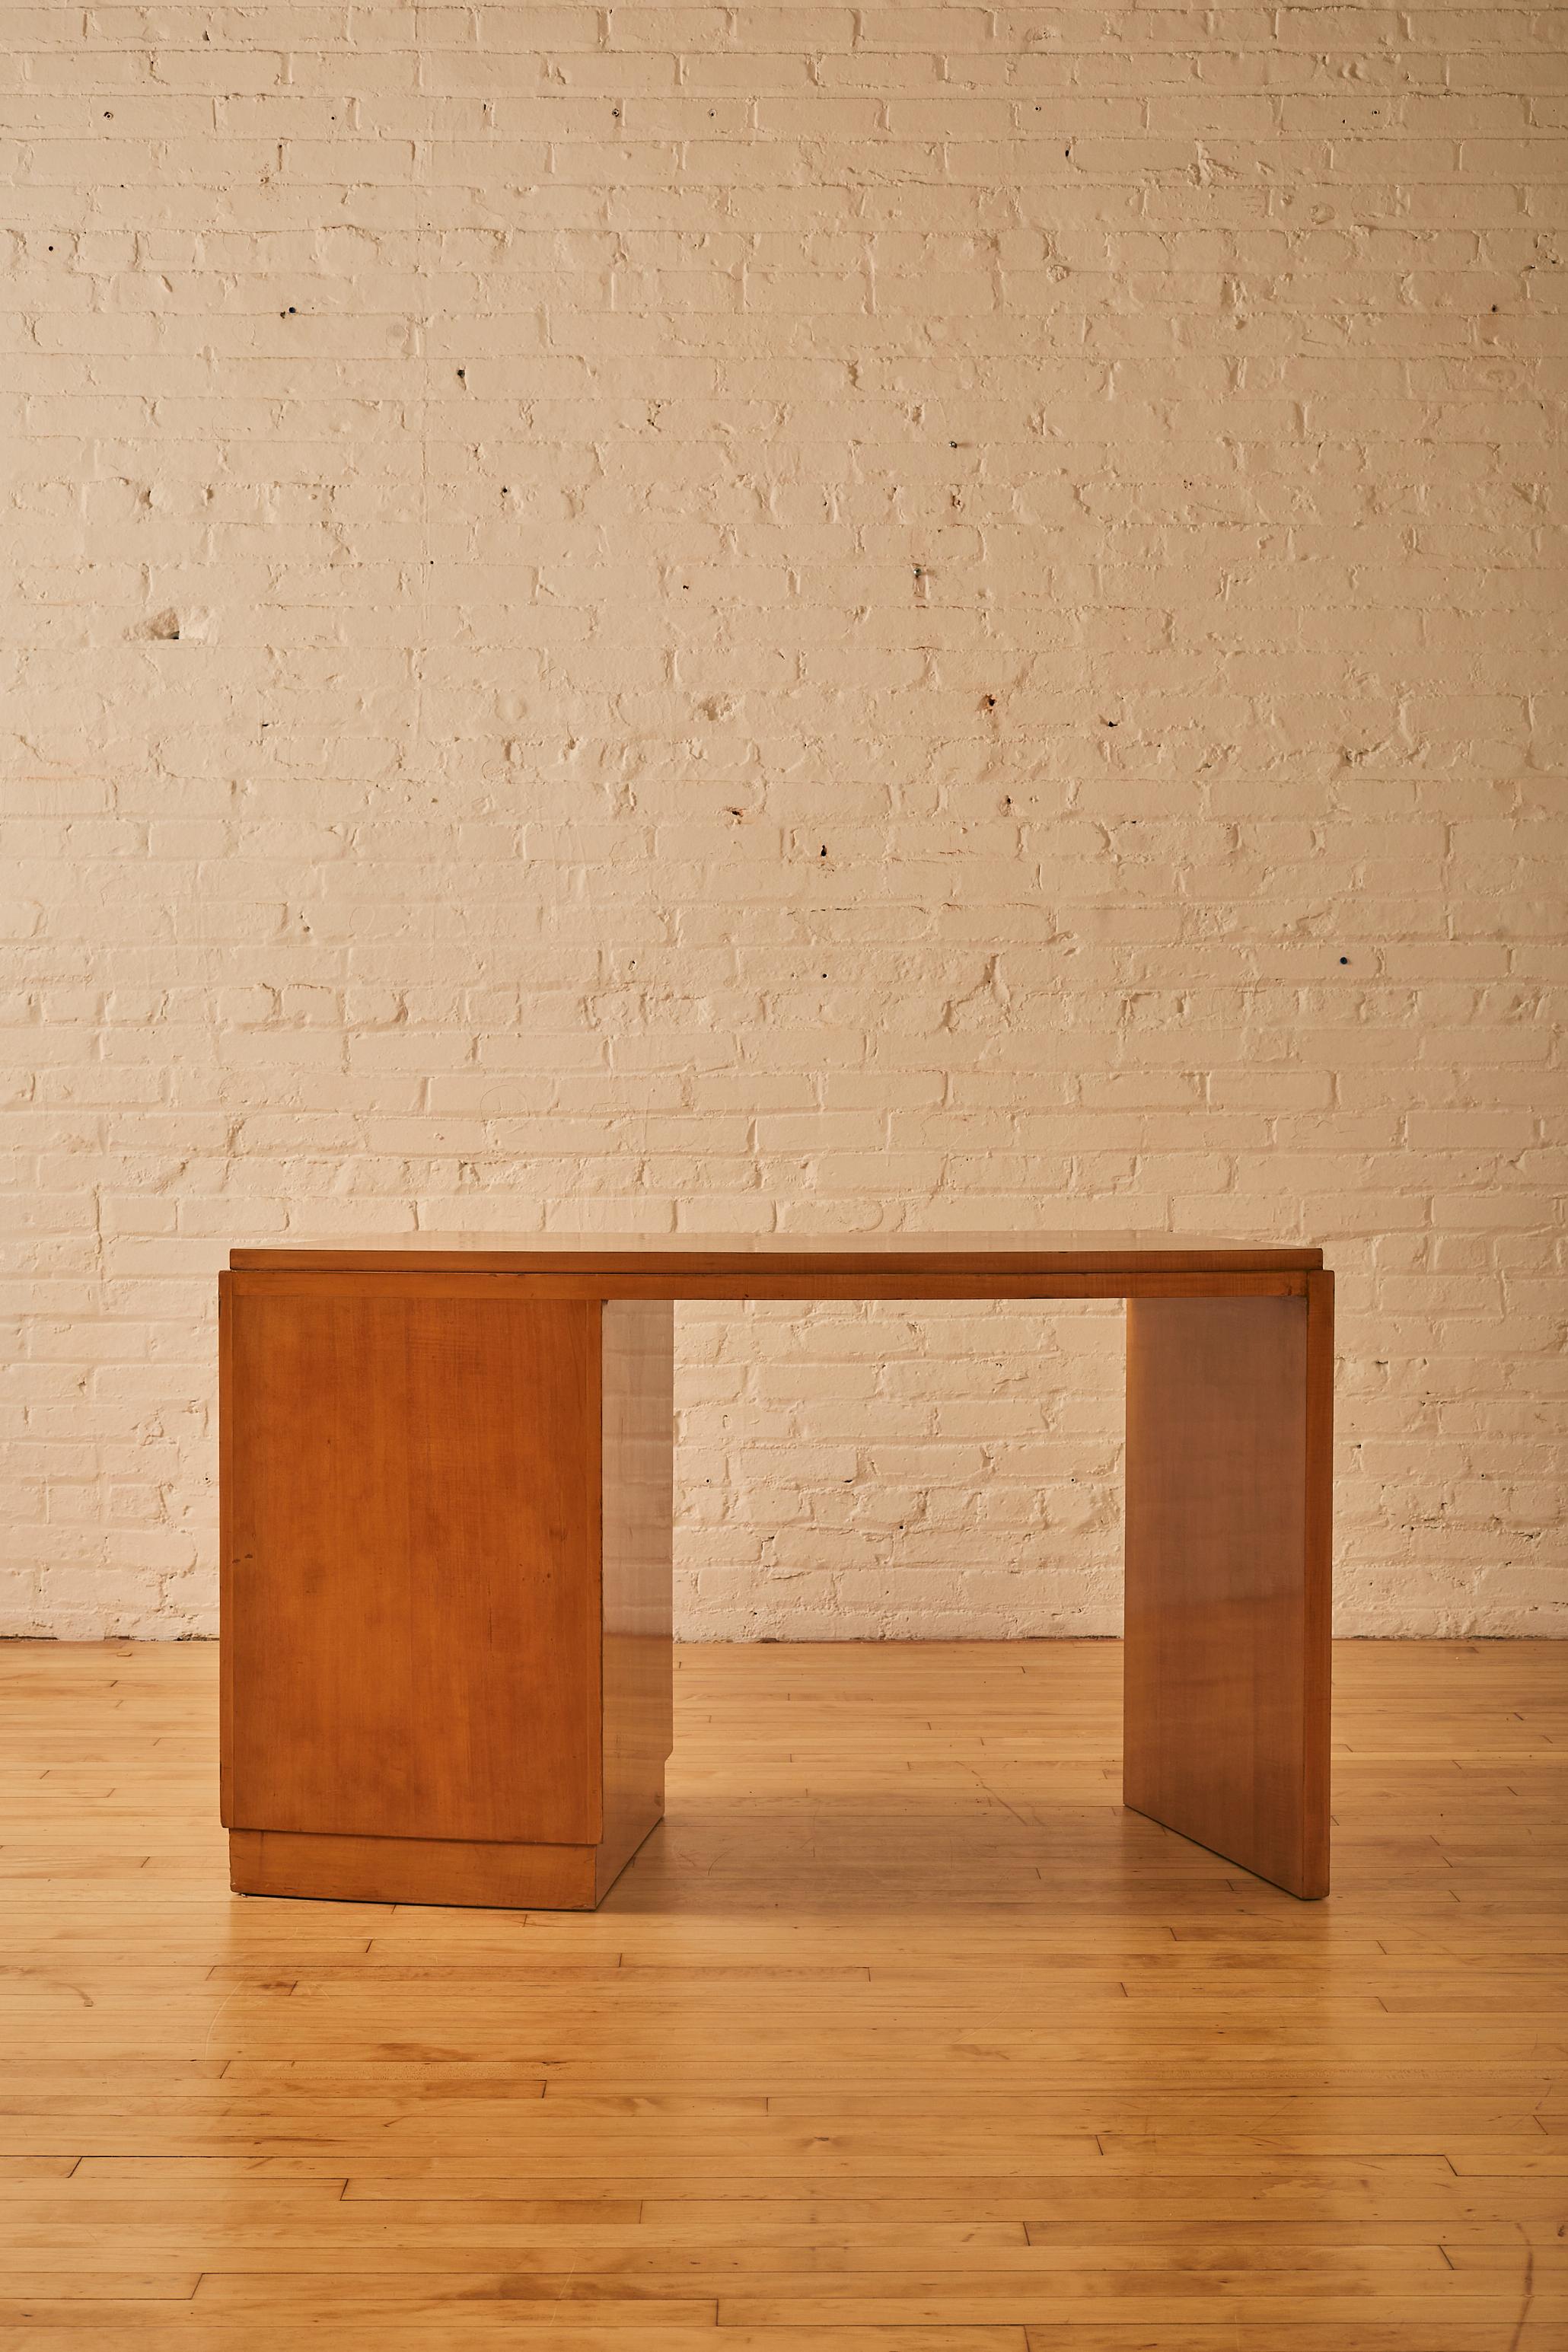 Semi circular birch wood desk by Jules Leleu

About Jules Leleu: 

Jules Leleu (1883 - 1961) a French designer and ensemblier, Jules Leleu was one of the key authors of the Art Deco movement. While he did not win the fame of such contemporaries